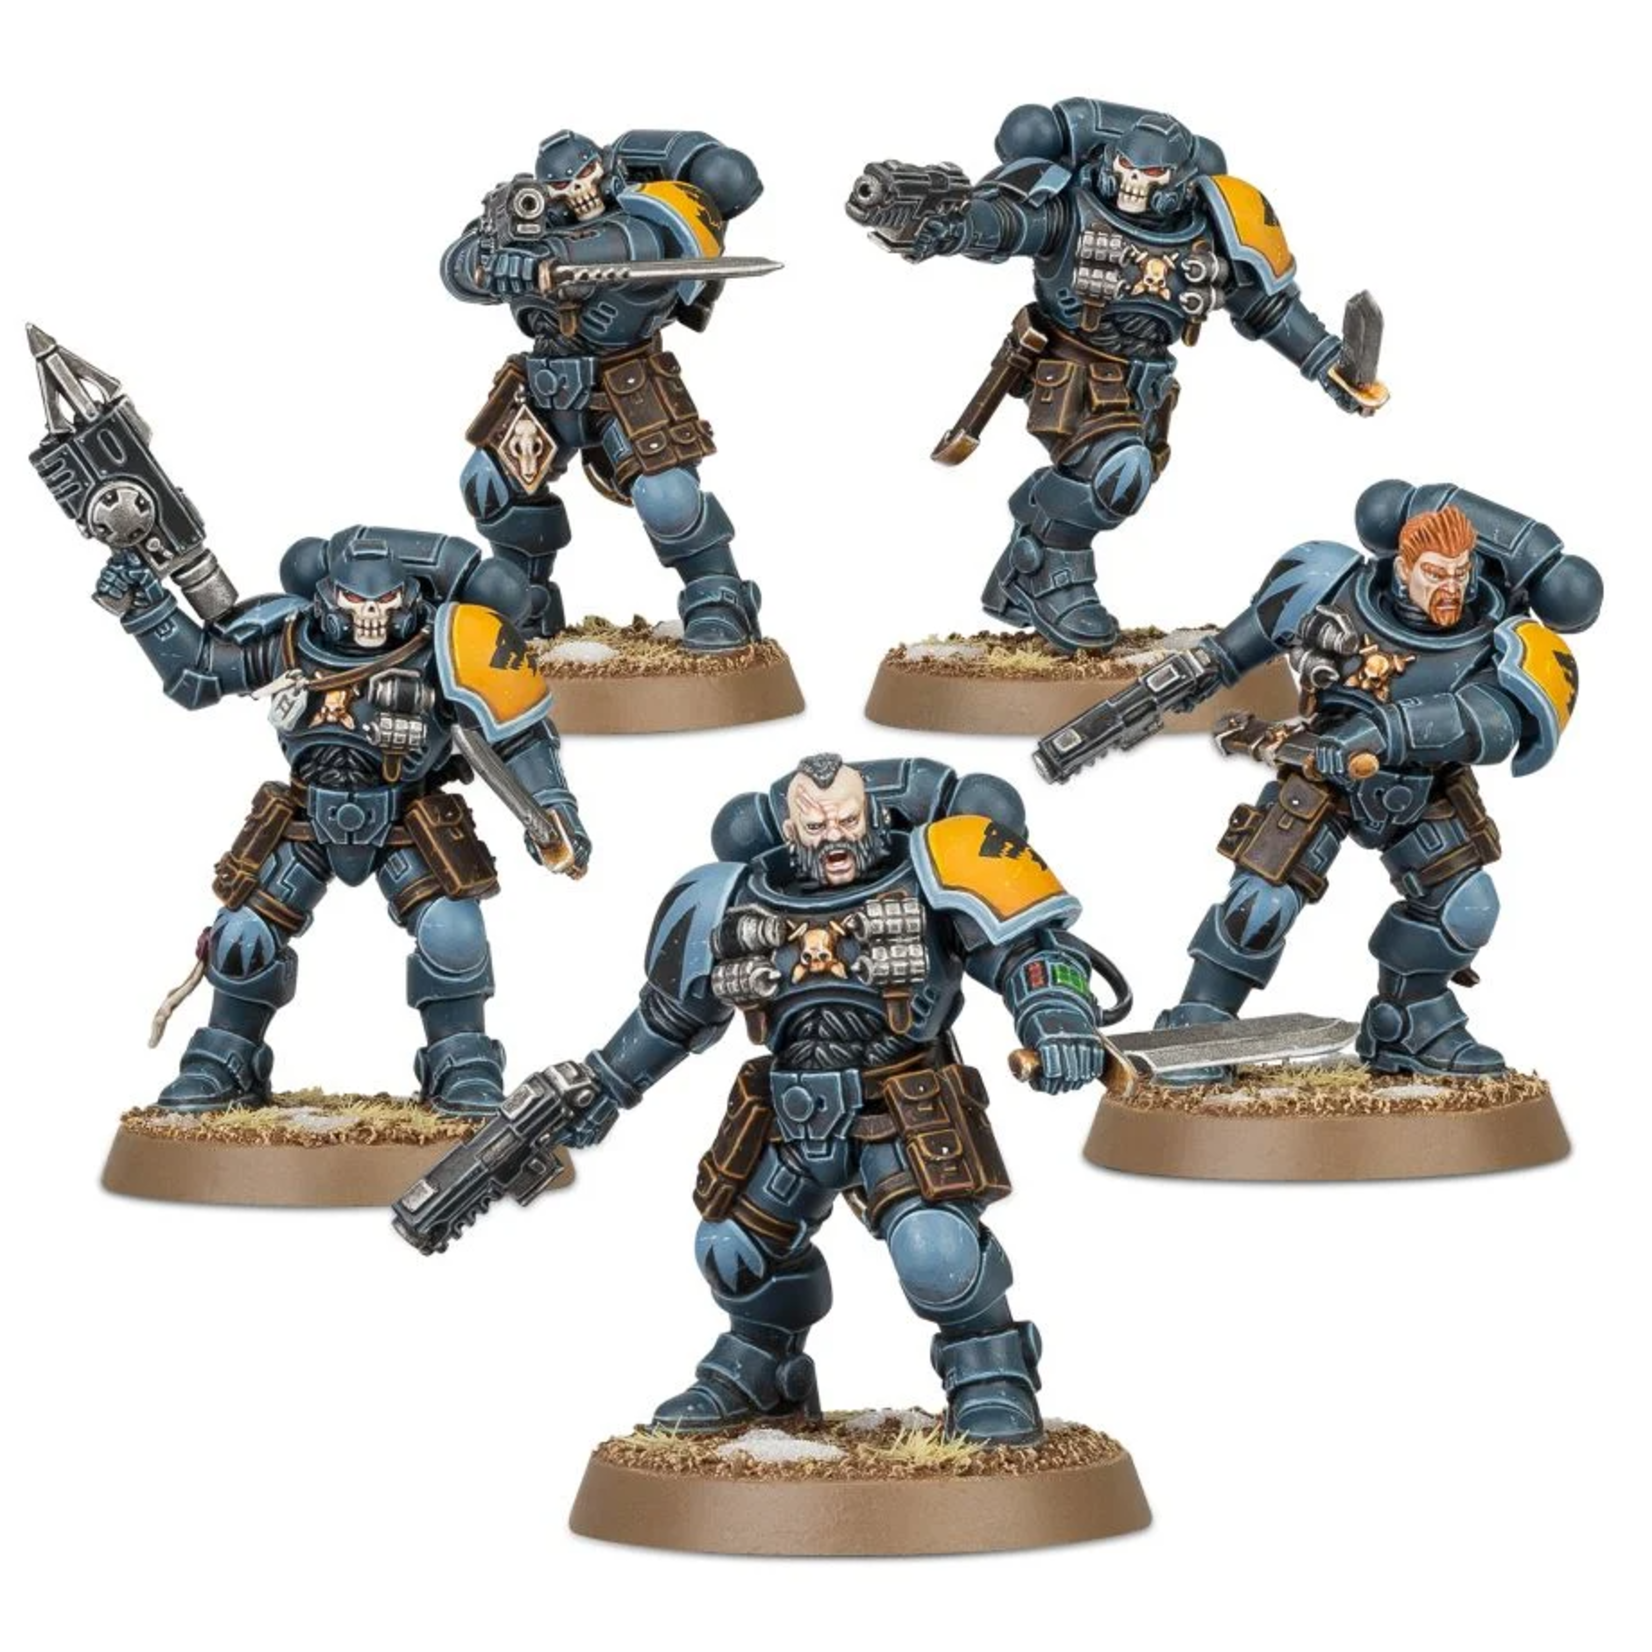 Games Workshop Warhammer 40k Space Marines Space Wolves Hounds of Morkai